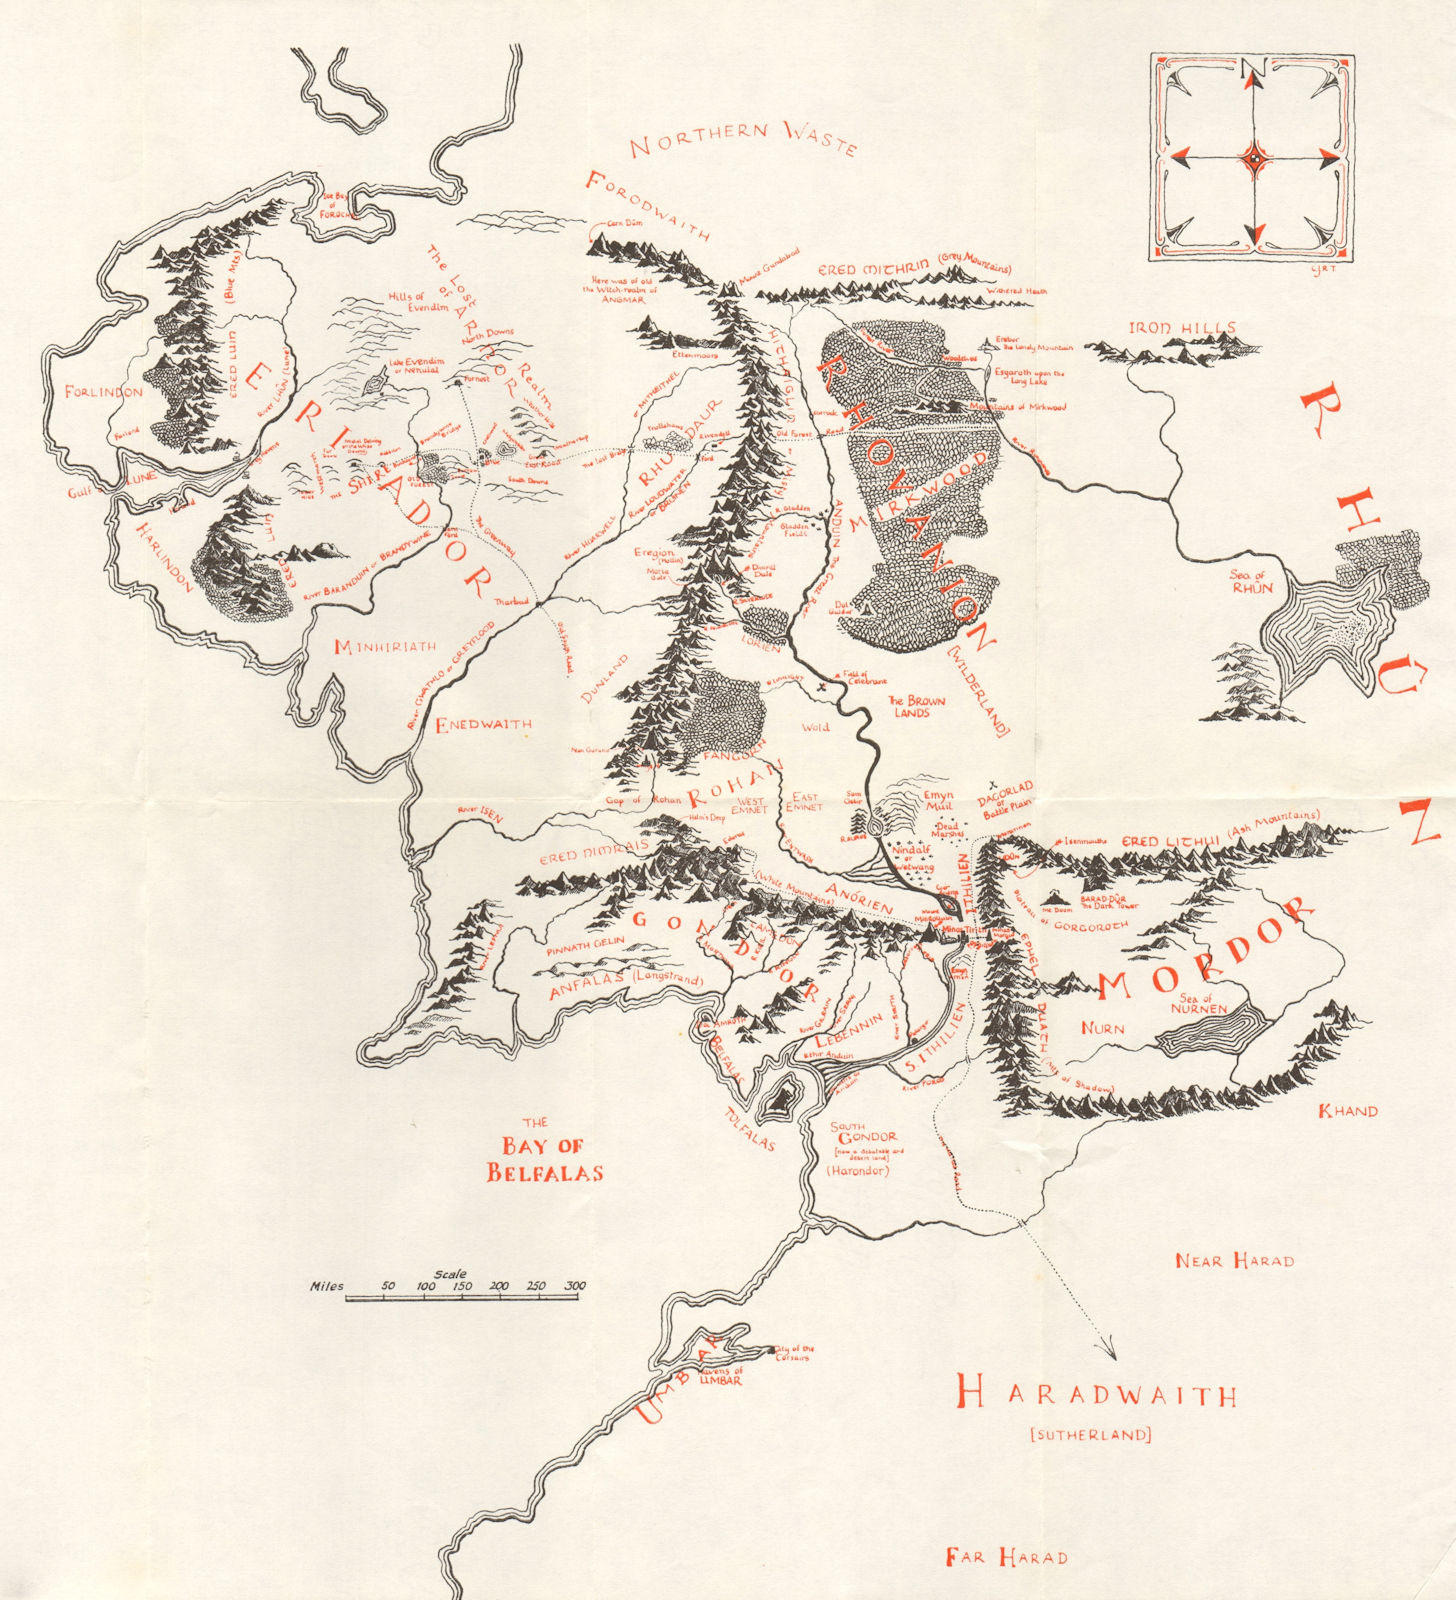 MIDDLE EARTH. Lord of the Rings. The Shire Gondor Mordor Rohan. TOLKIEN 1966 map